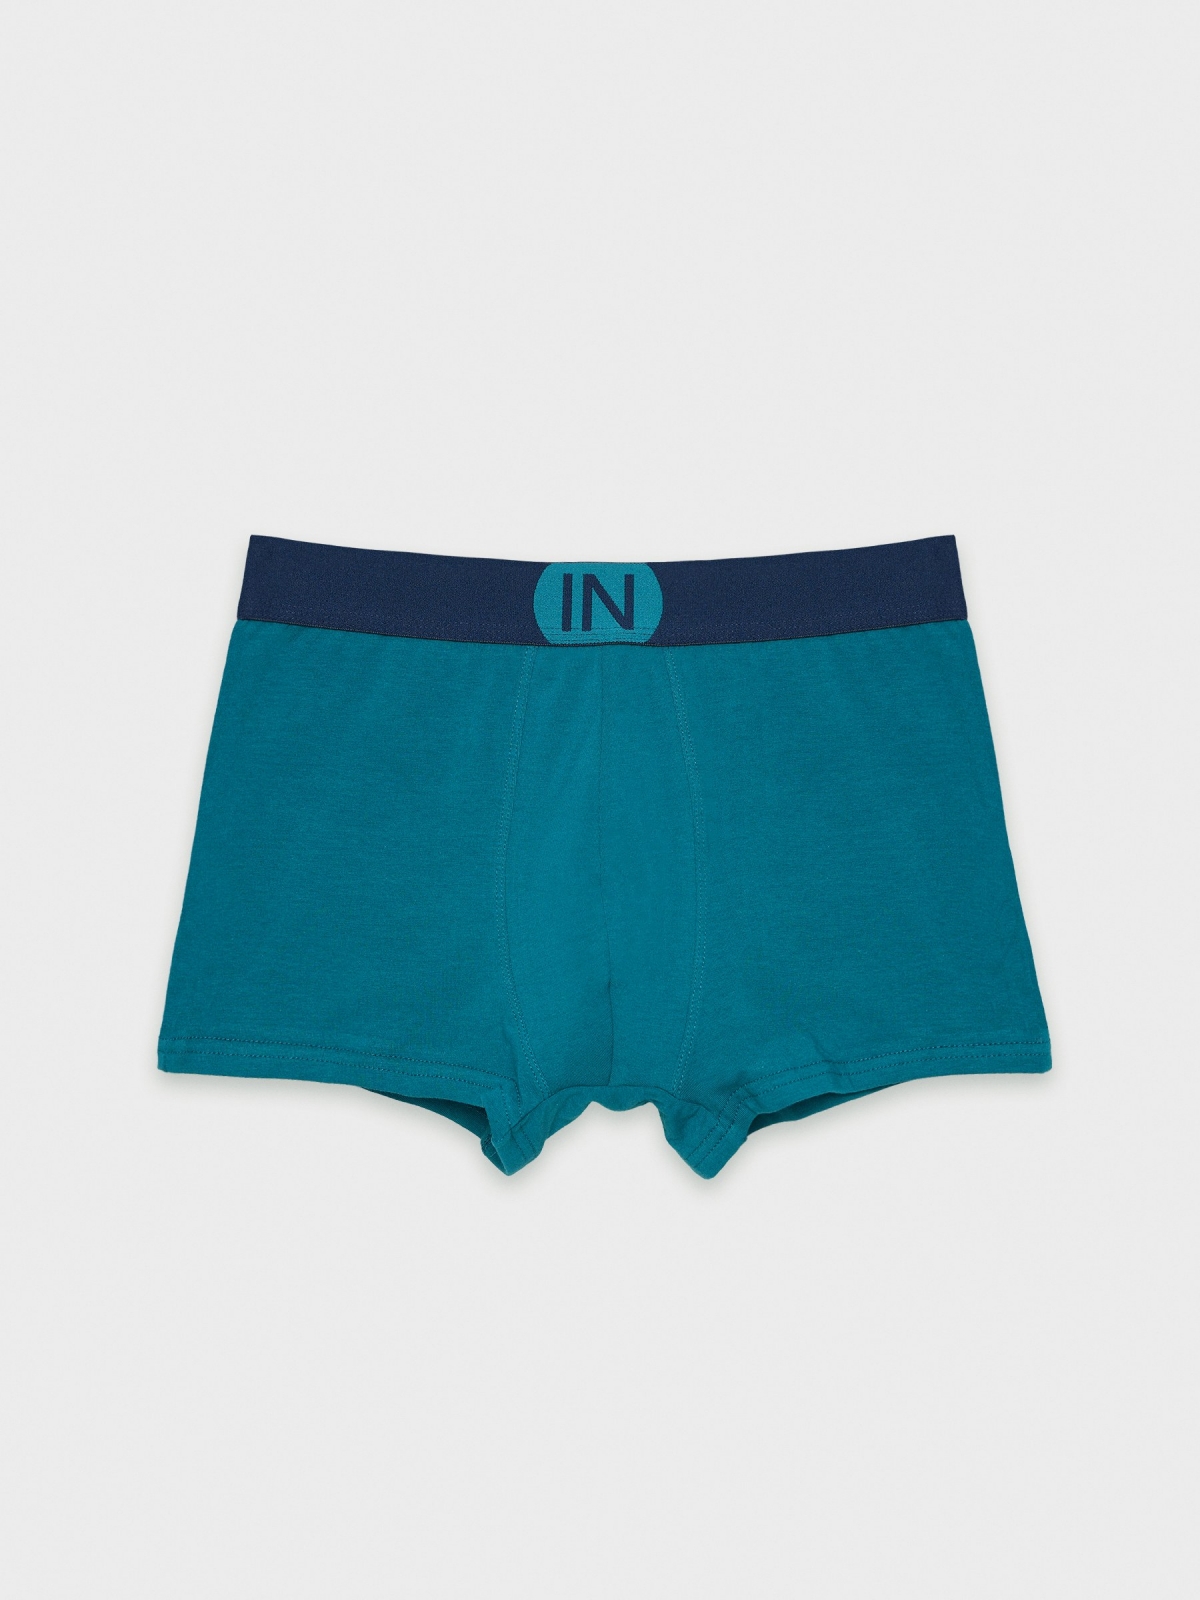 Pack of 4 colored boxers multicolor detail view